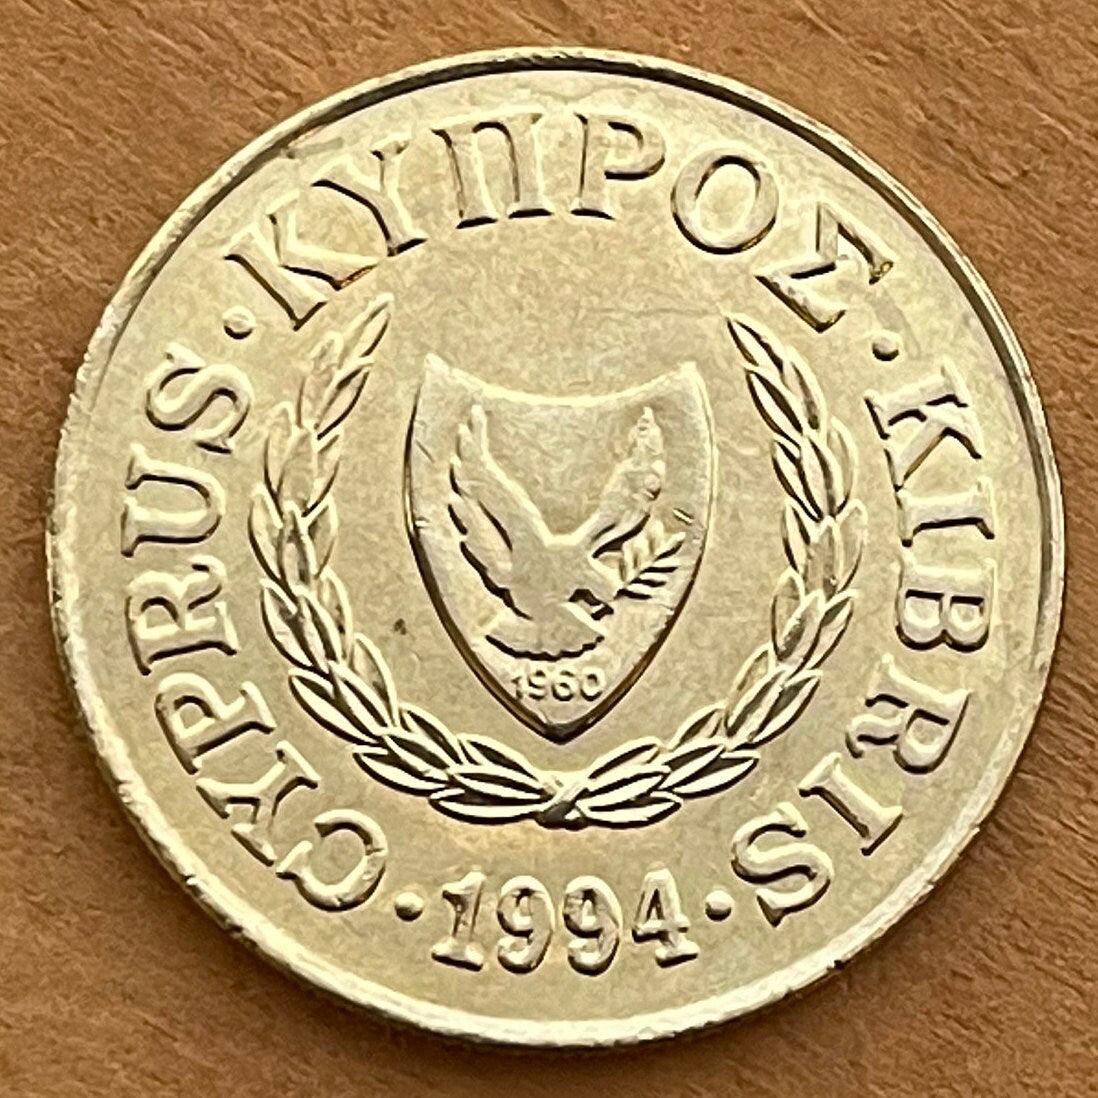 Zeno the Stoic & Dove with Olive Twig 20 Cents Cyprus Authentic Coin Money for Jewelry and Crafts (1960) (Greek Philosopher) (Citium)